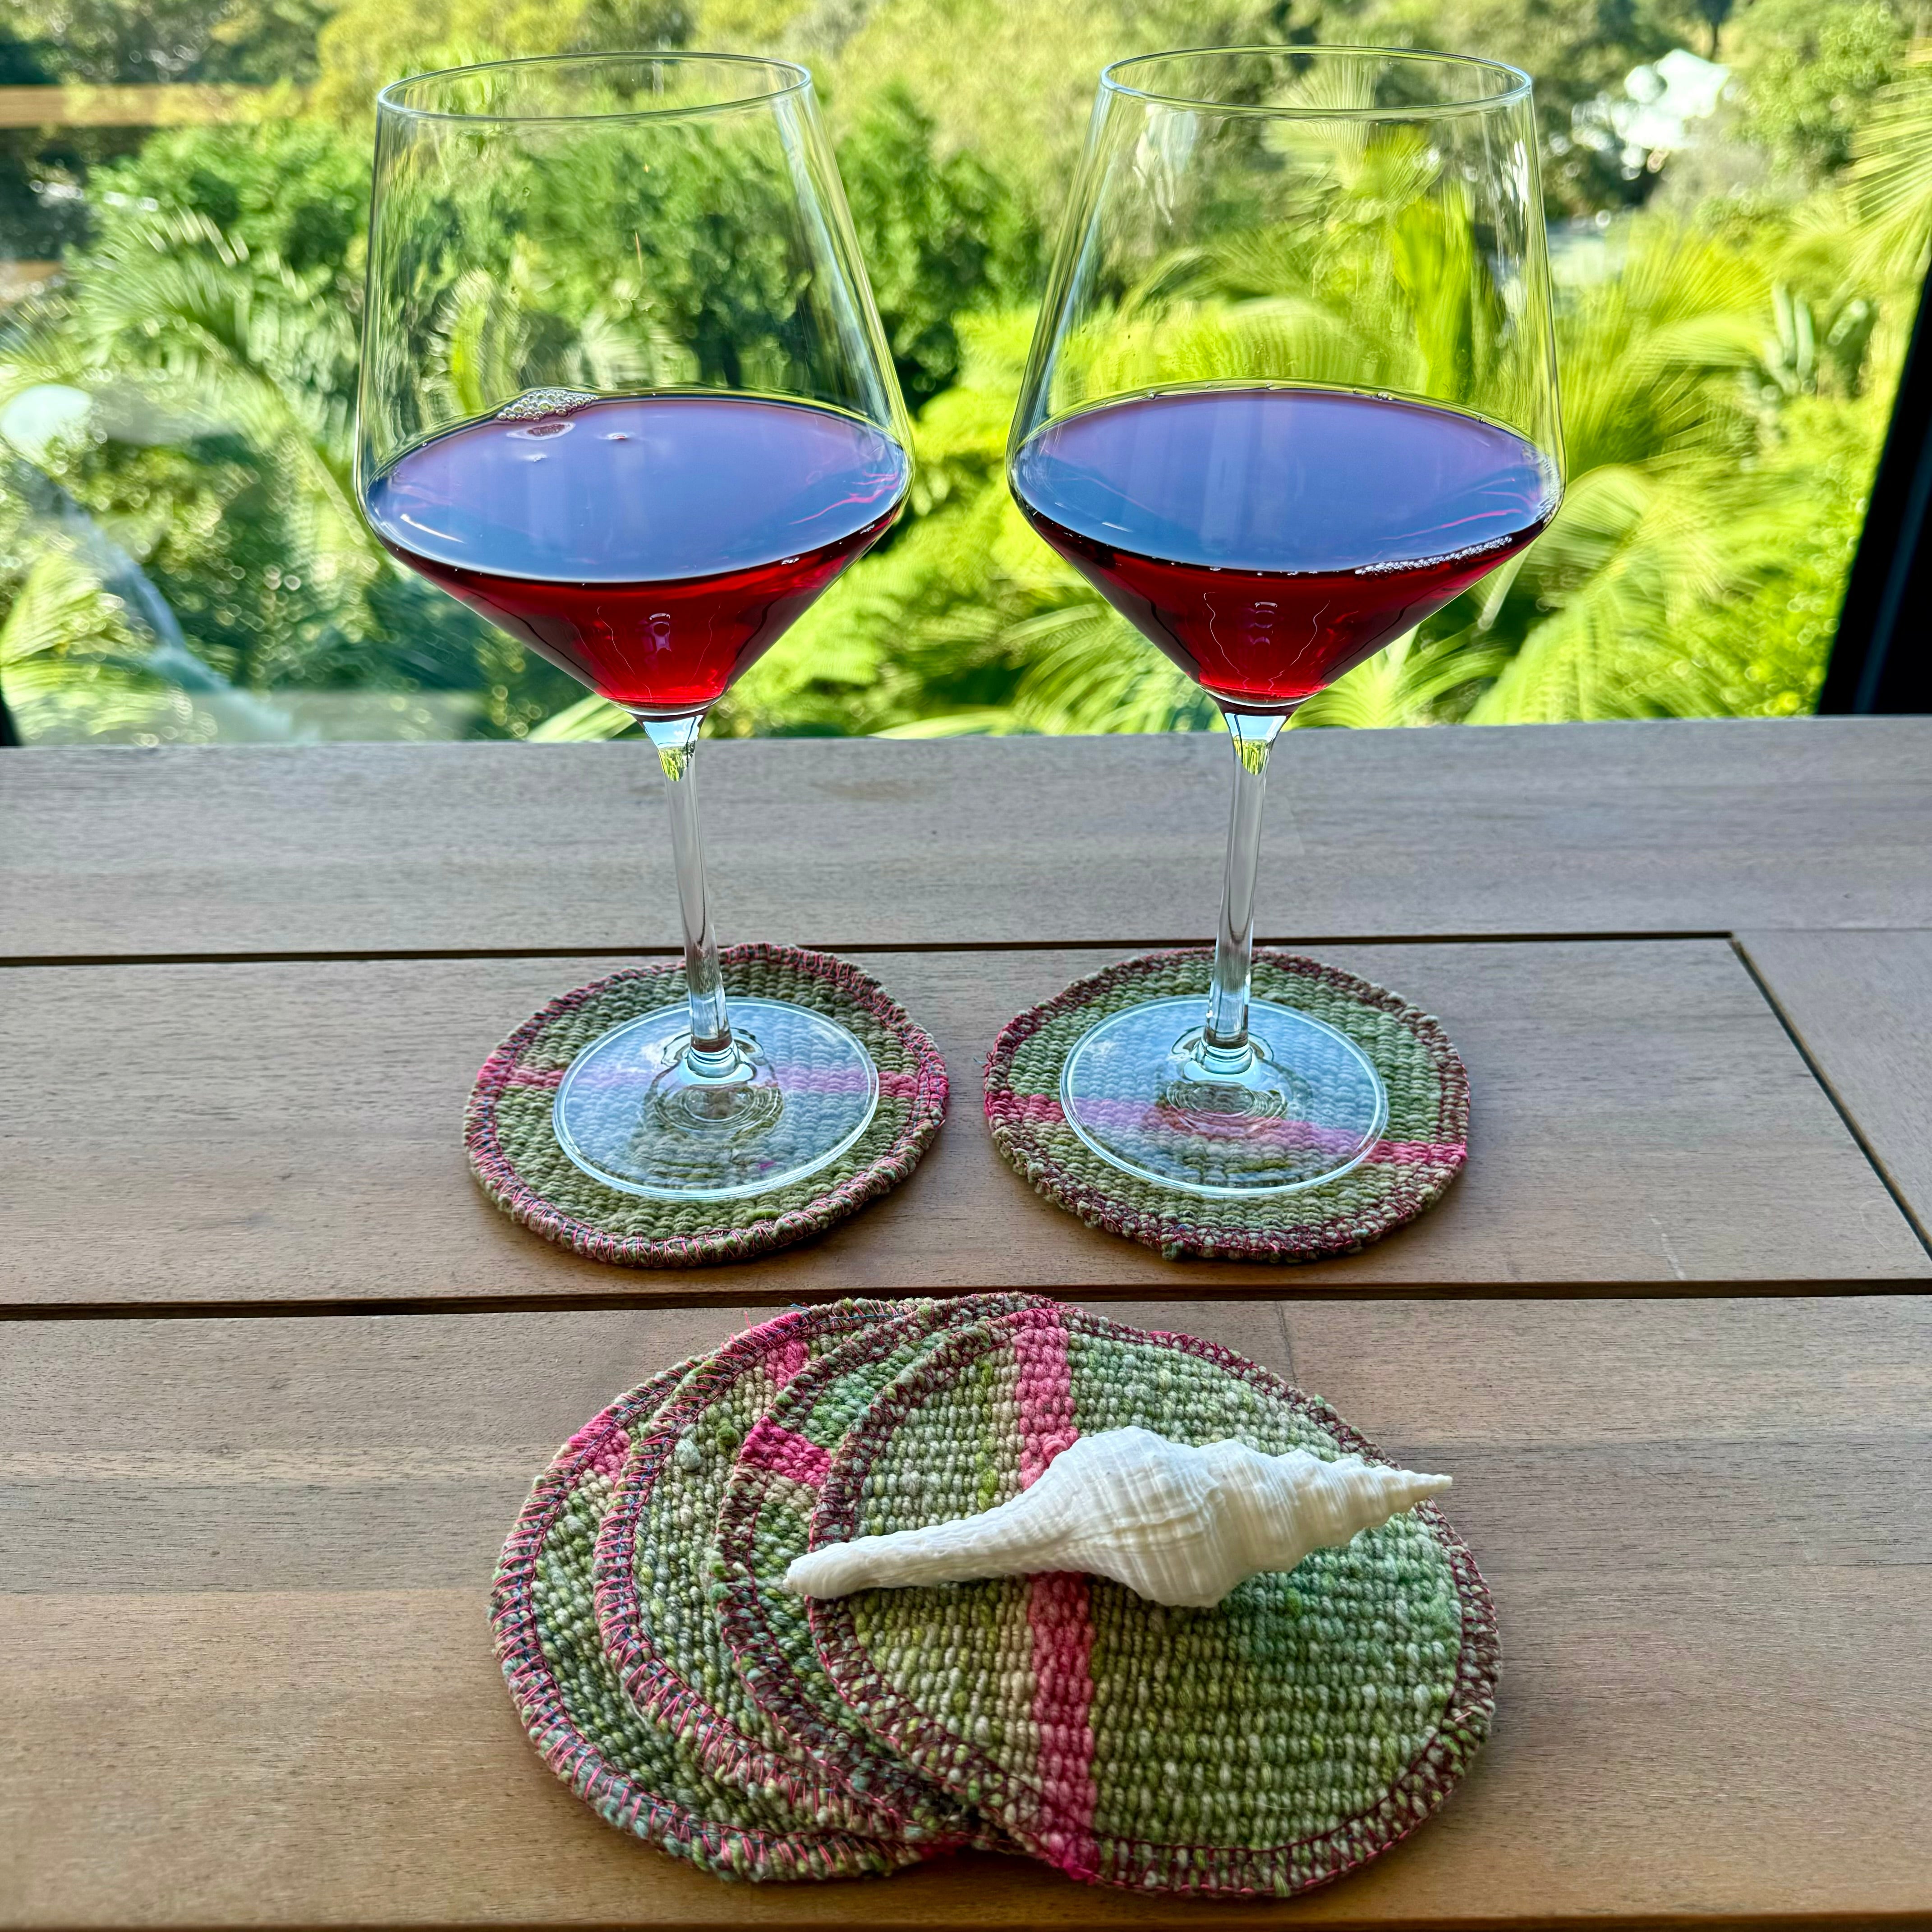 Enjoying a glass of red wine. How beautiful do they look like on those coasters made from Peruvian Frazadas? Our commitment to net zero, no waste.